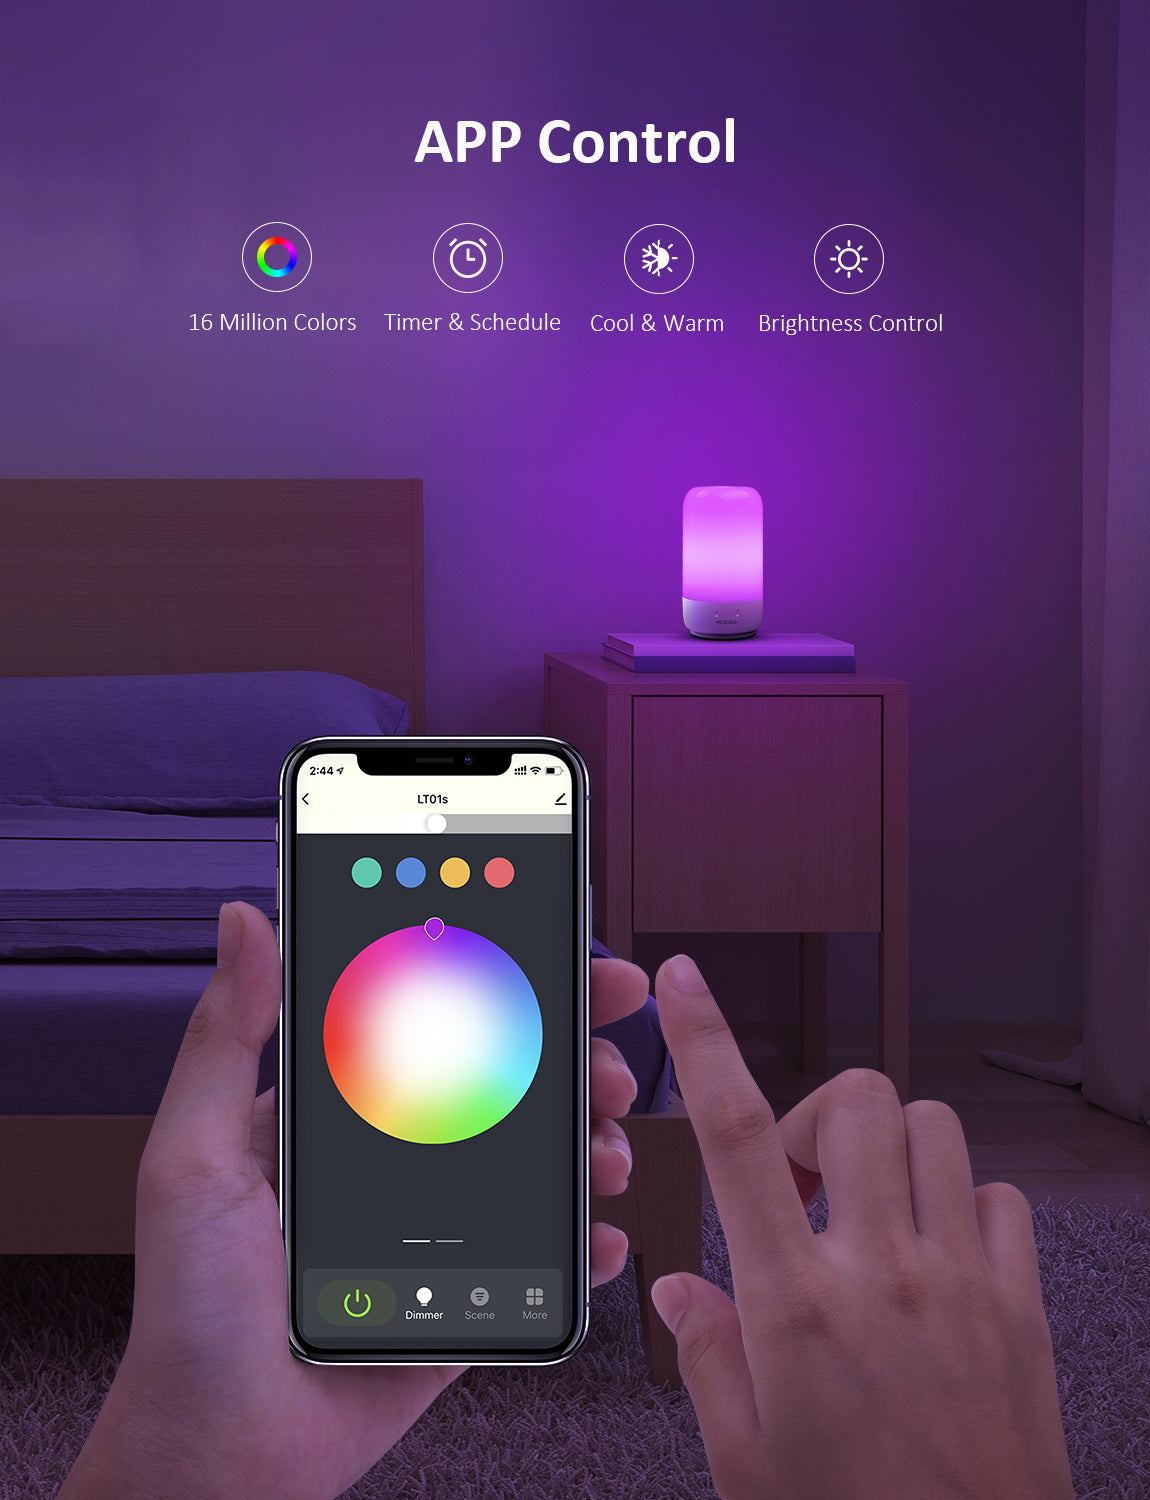 Download the "NexiGo Home" APP to control your lamp with ease anywhere and anytime.